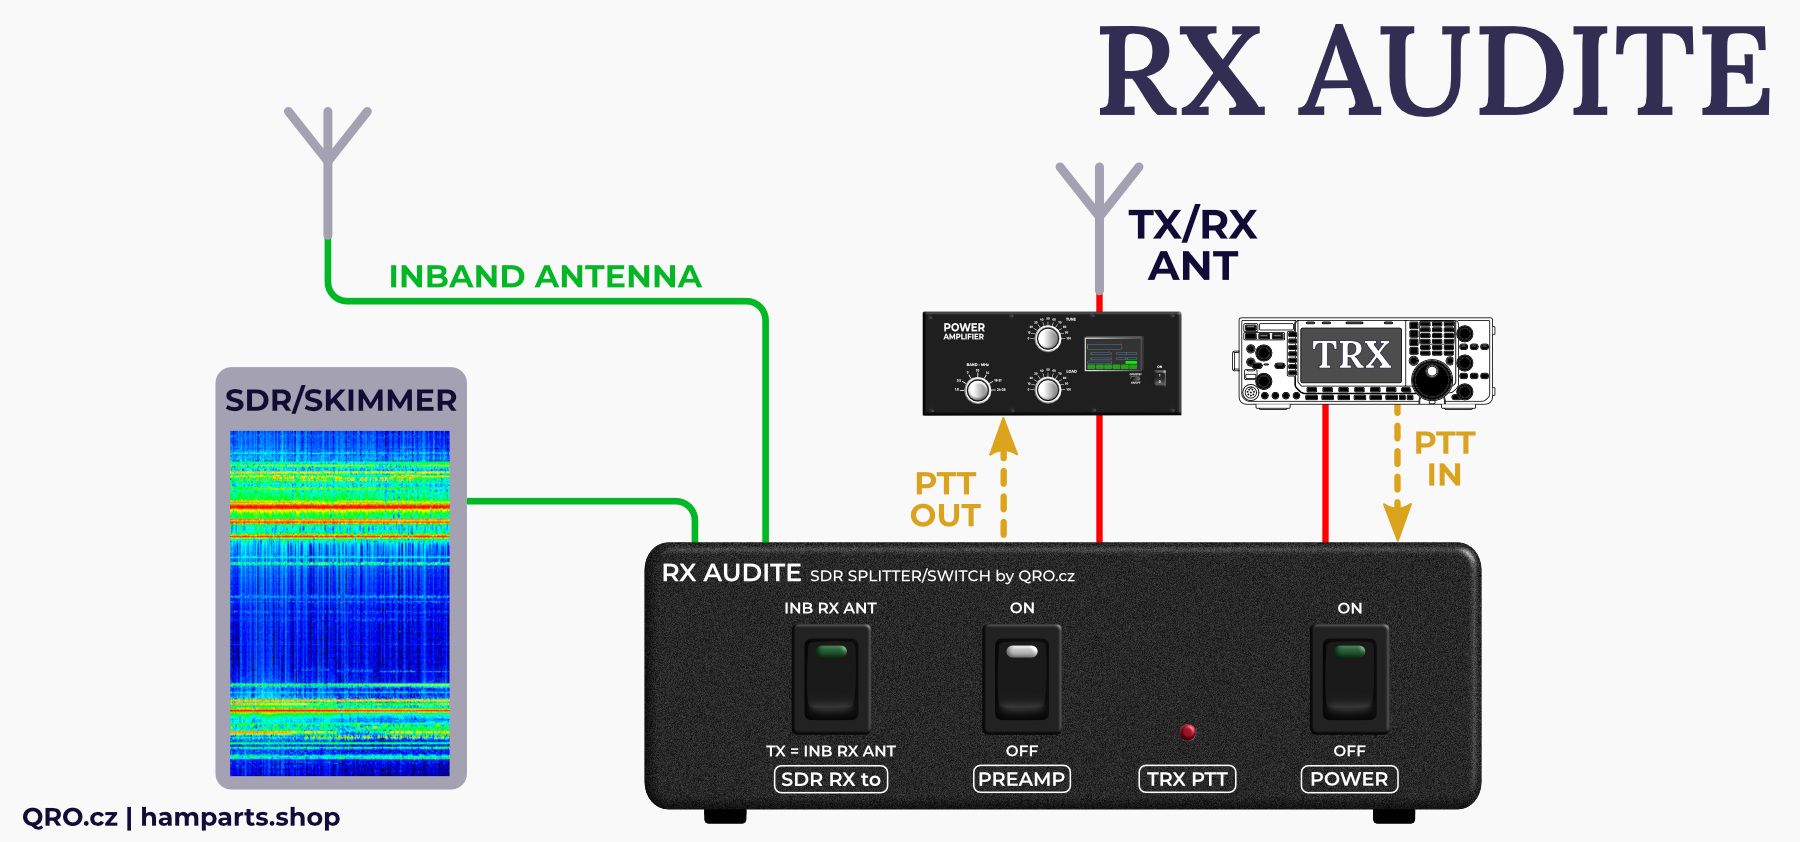 rx audite sdr switch by qro.cz hamparts.shop